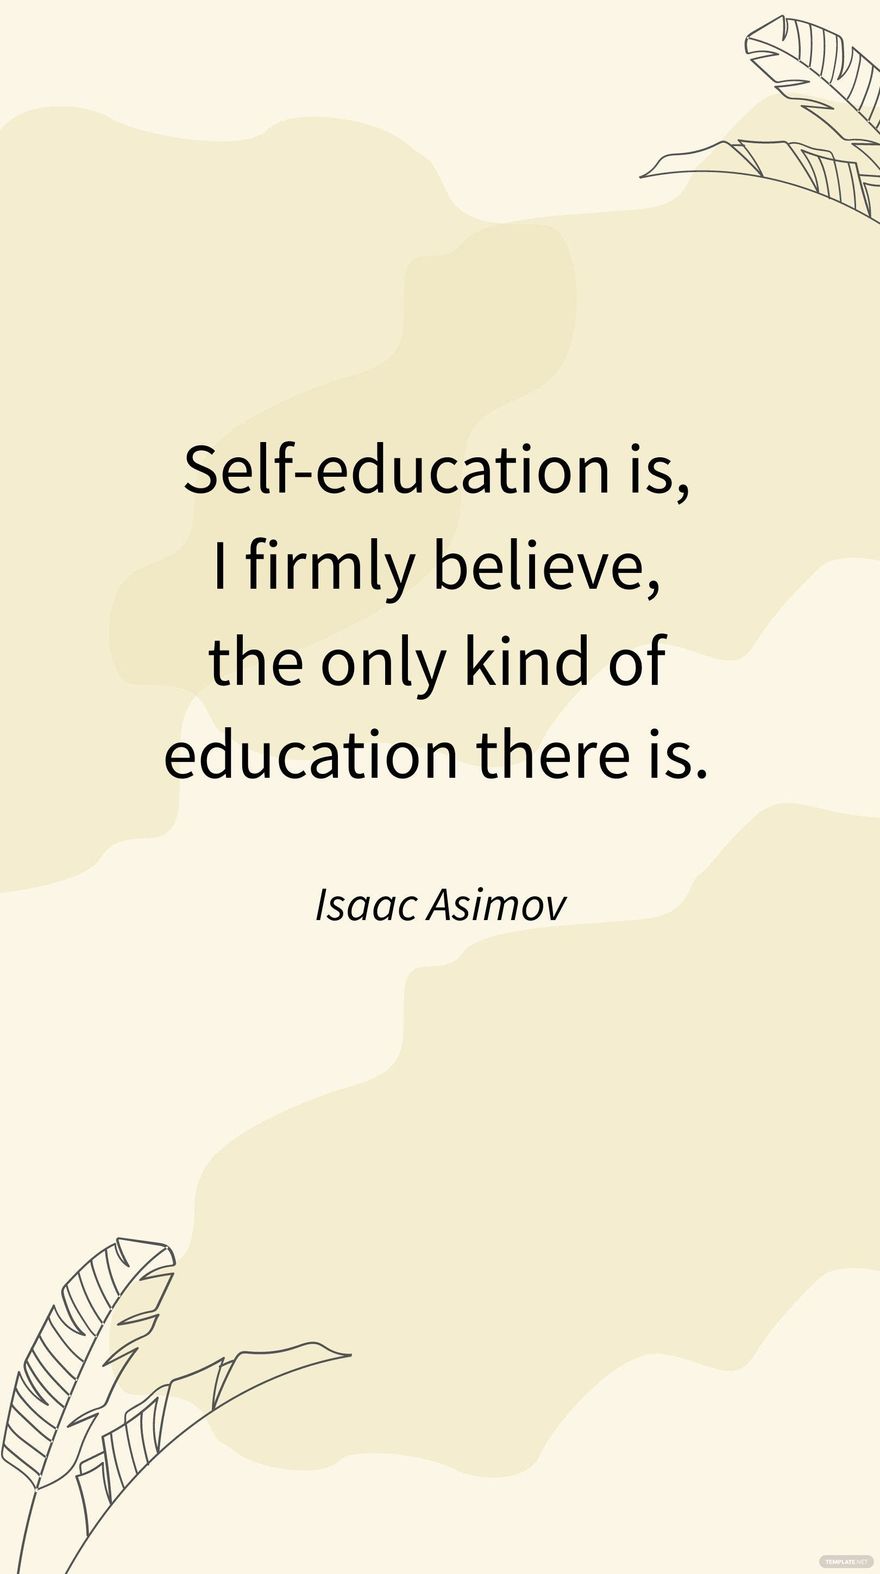 Isaac Asimov - Self-education is, I firmly believe, the only kind of education there is.